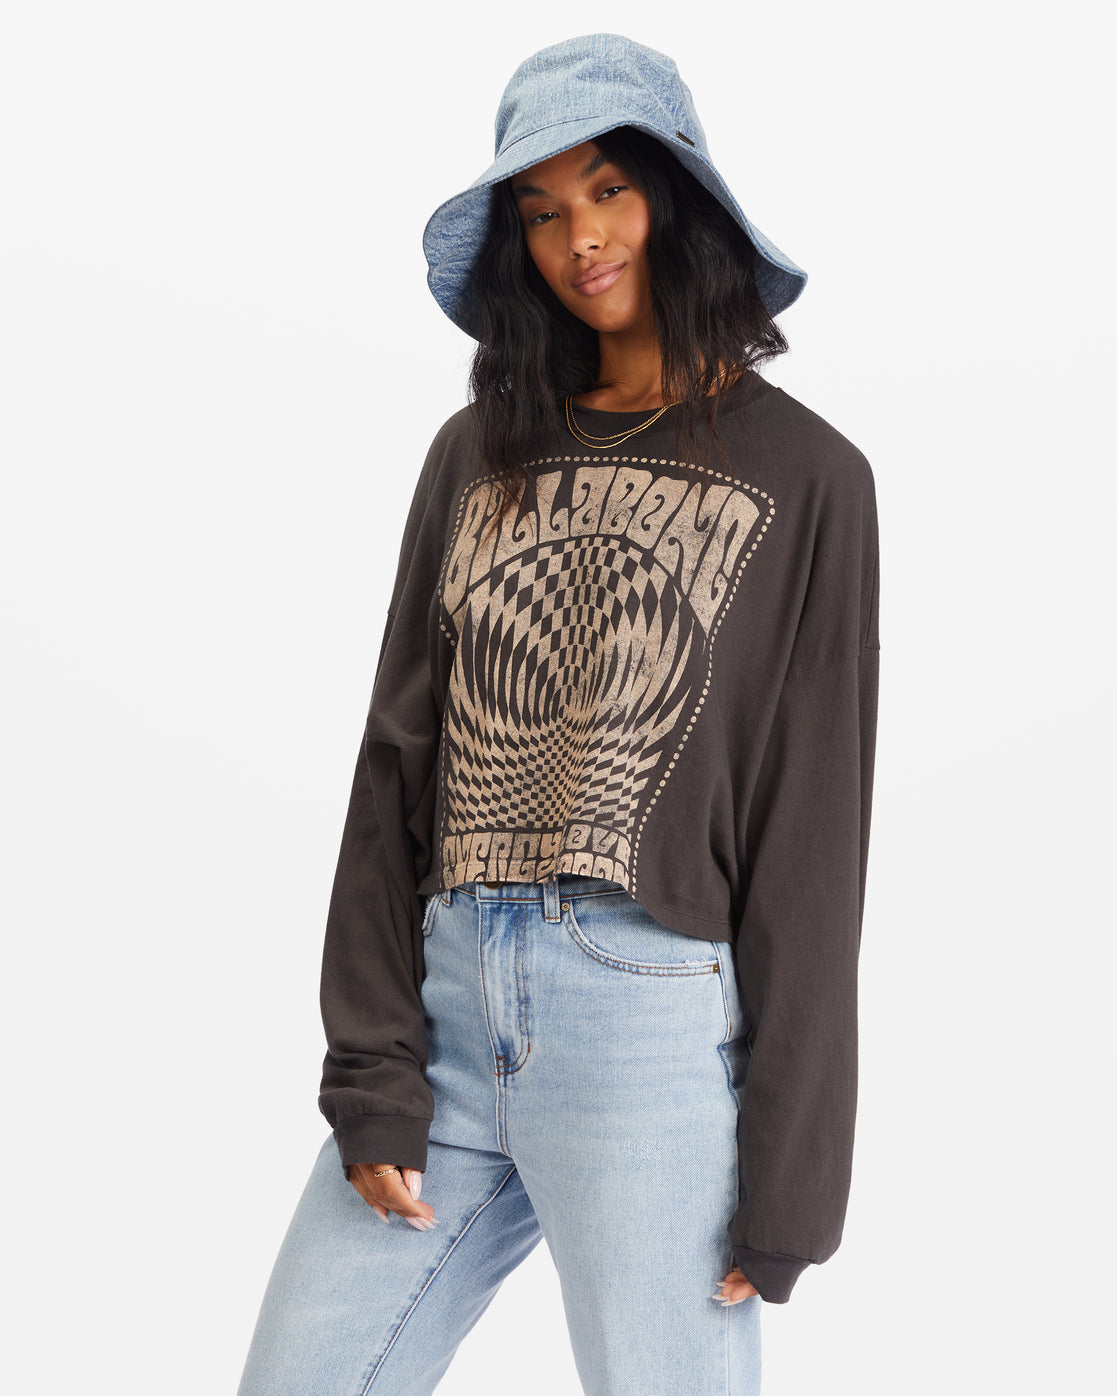 Go With The Flow Cropped Long Sleeve T-Shirt